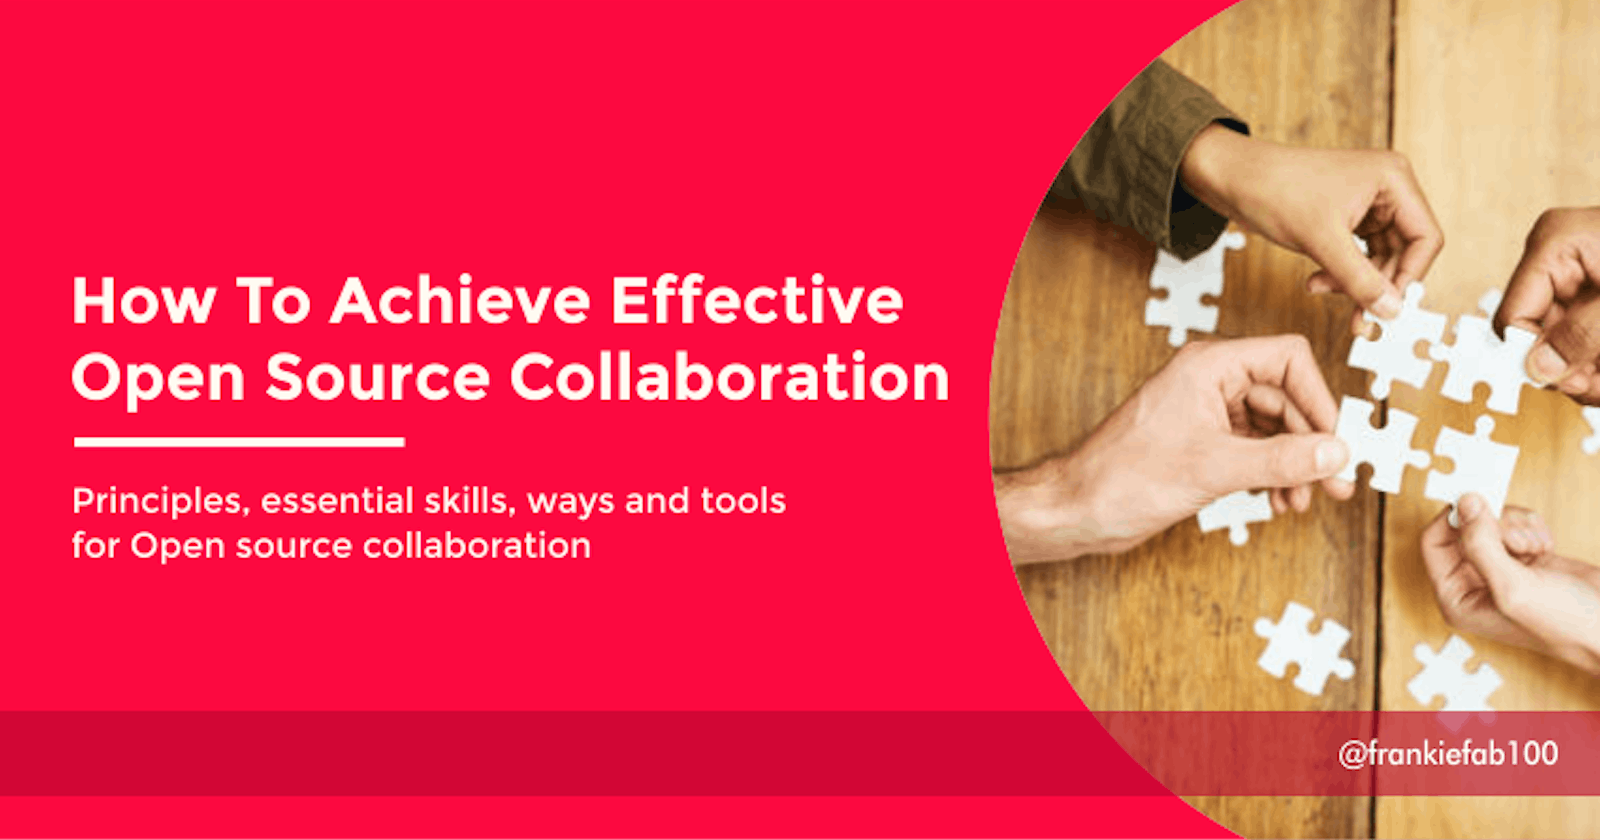 How To Achieve Effective Open Source Collaboration